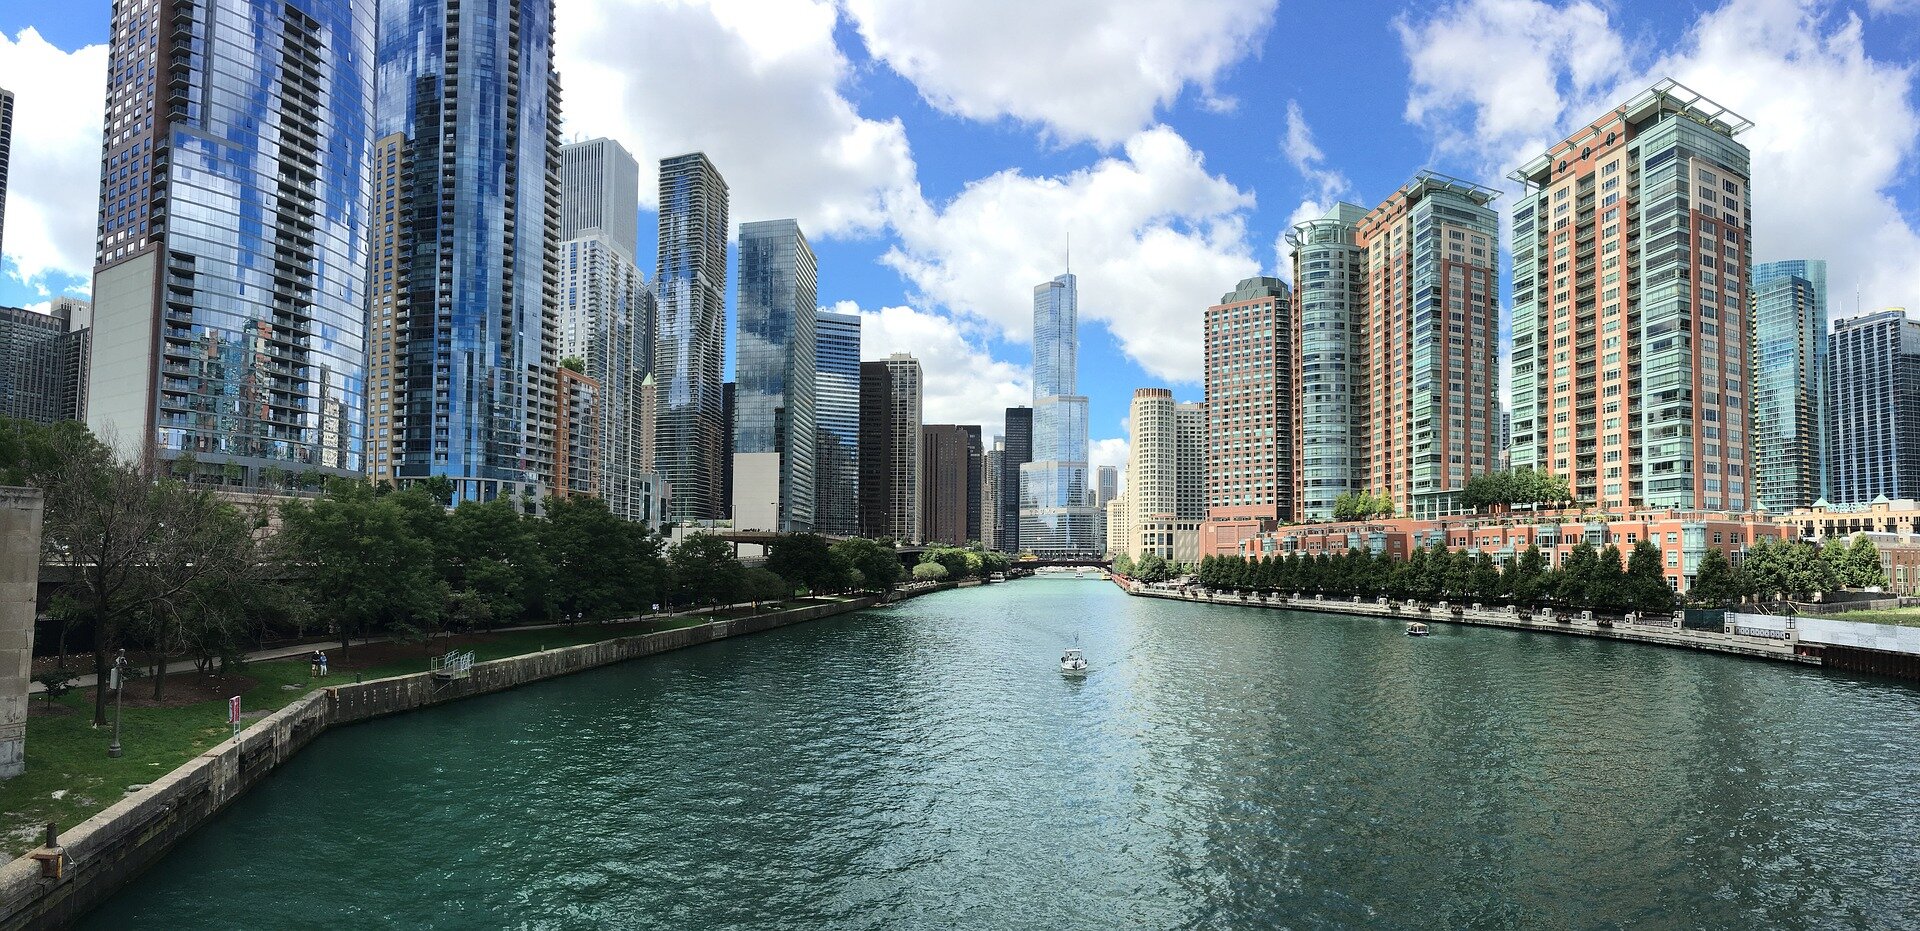 Nearly 60 different types of fish found in Chicago waterways, study shows